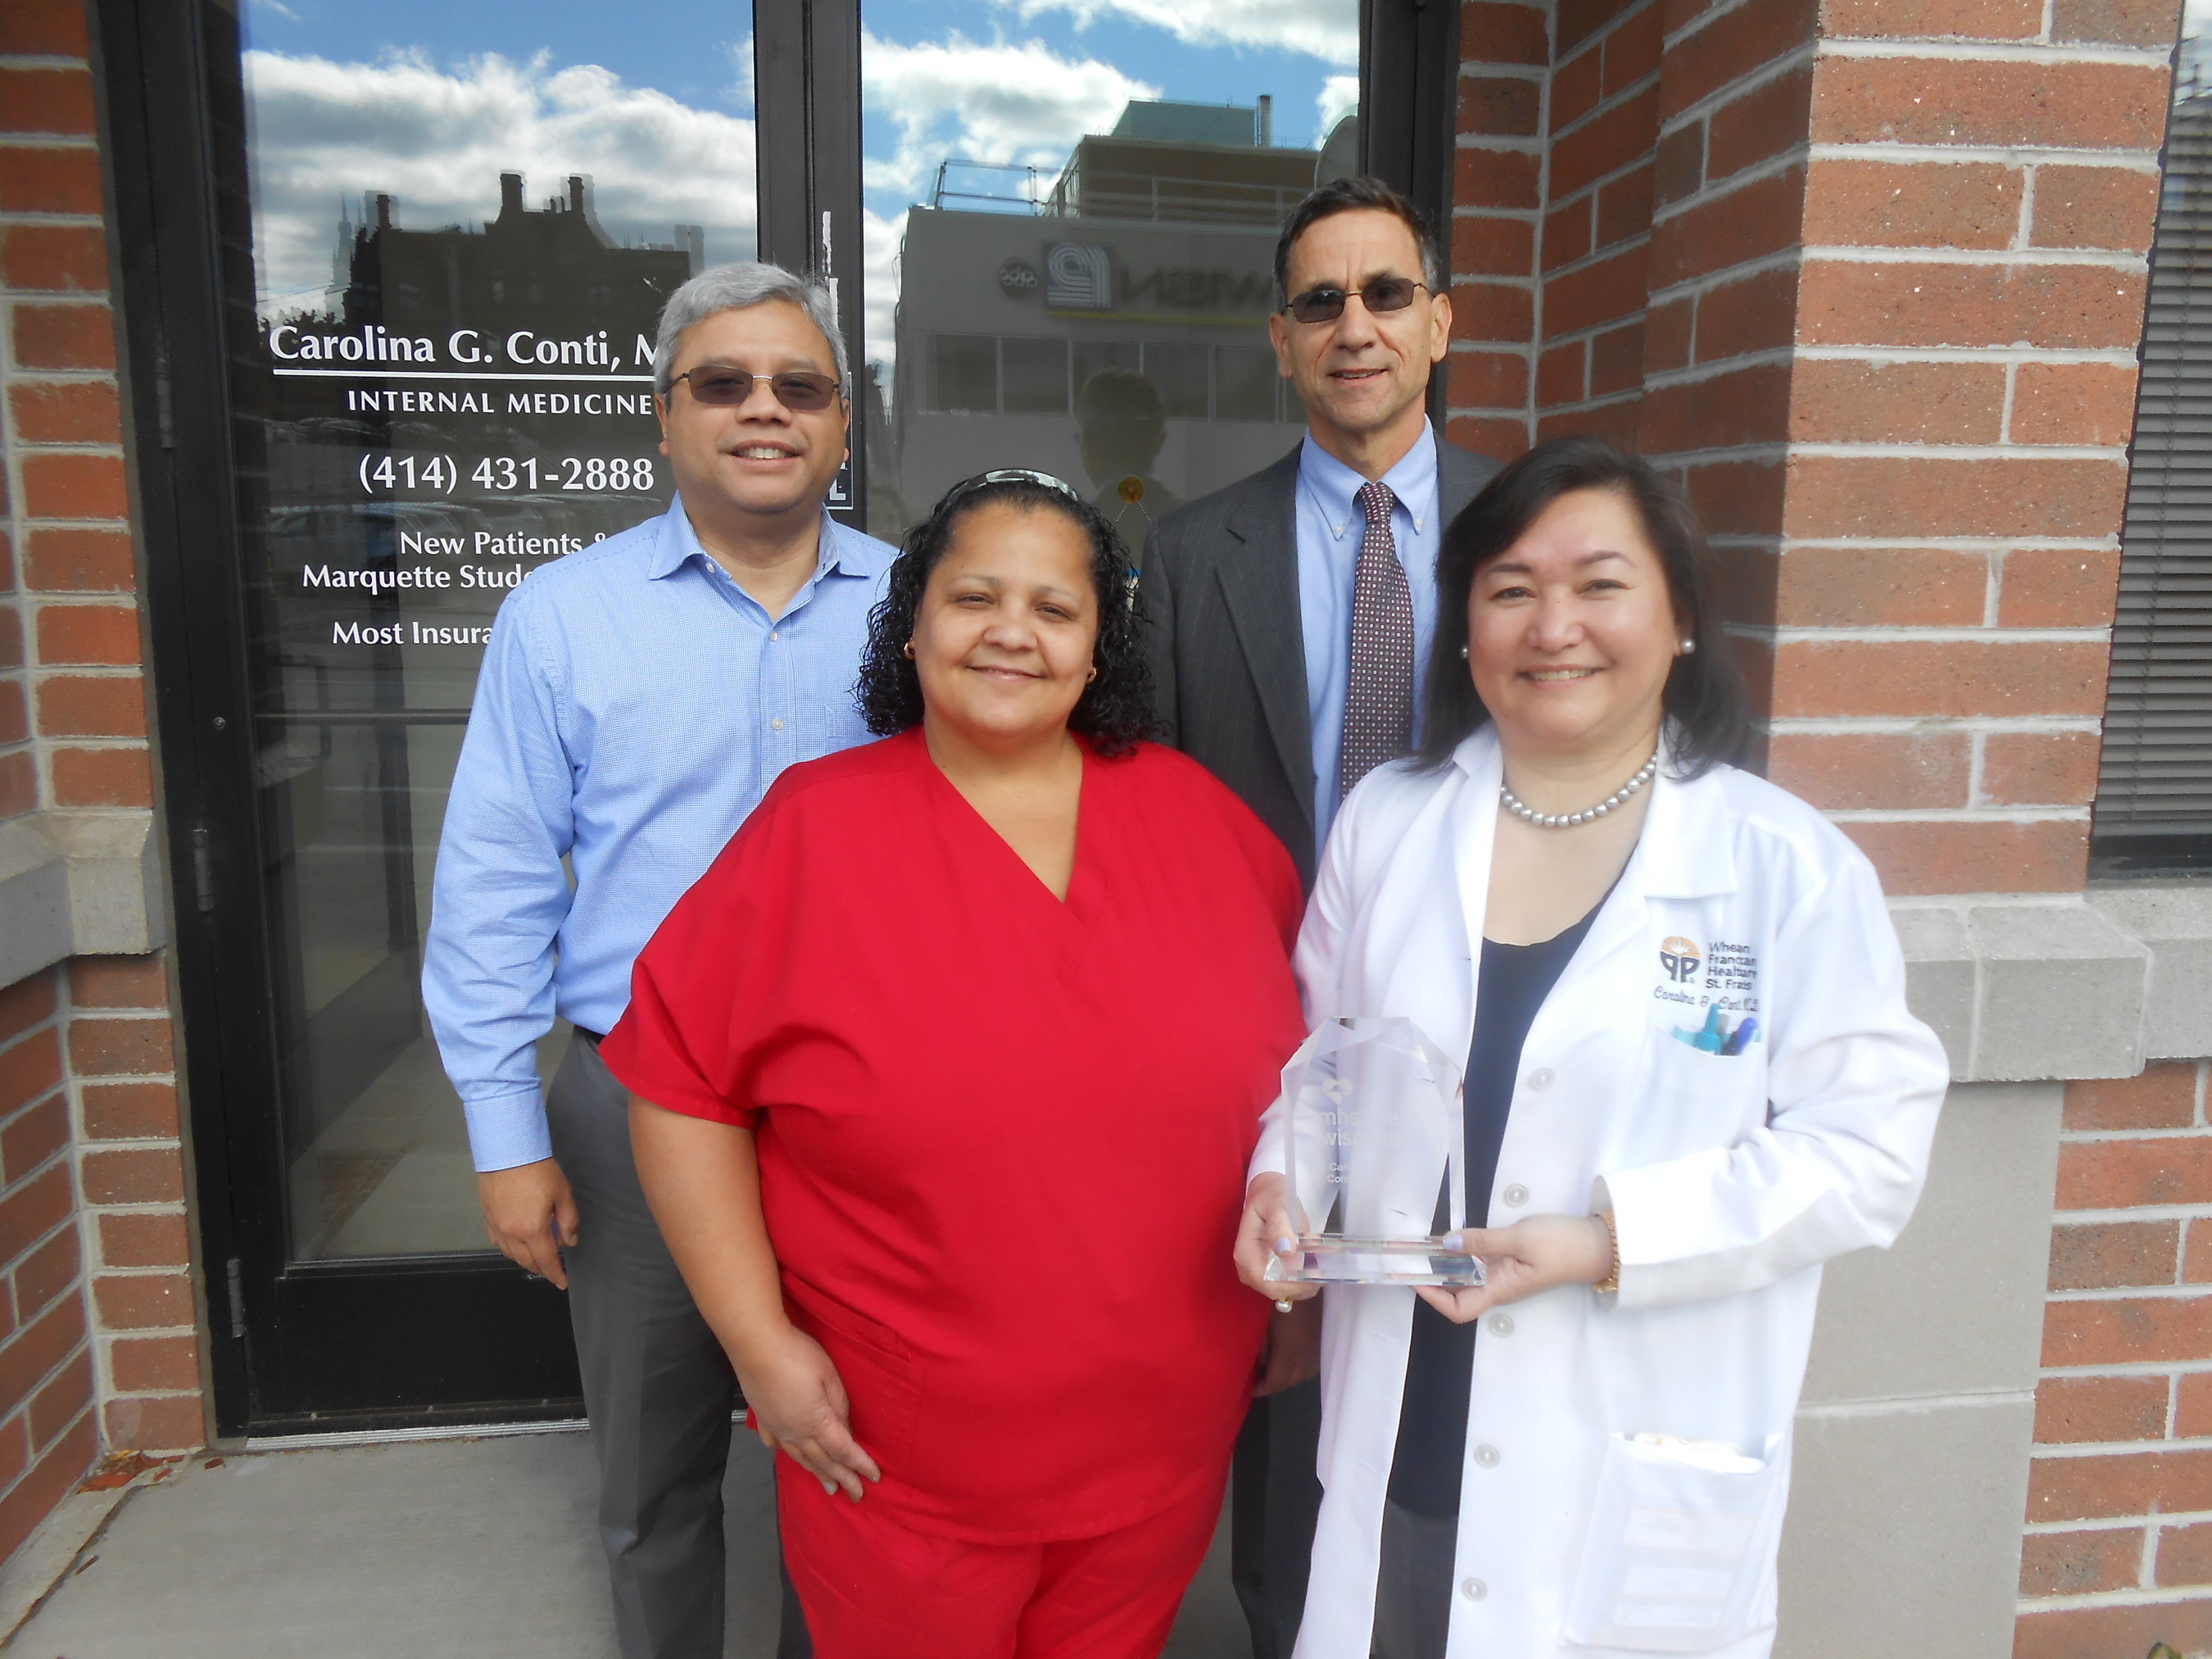 MHS Health Wisconsin presented its 8th Annual Summit Award to Carolina Conti, MD, a board-certified internal medicine physician in Milwaukee, on Oct. 16. From left are Joselito Conti, office manager; Eileen Lozada, medical assistant; Robert Lyon, MD, chief medical officer at MHS Health Wisconsin; and Carolina Conti, MD.